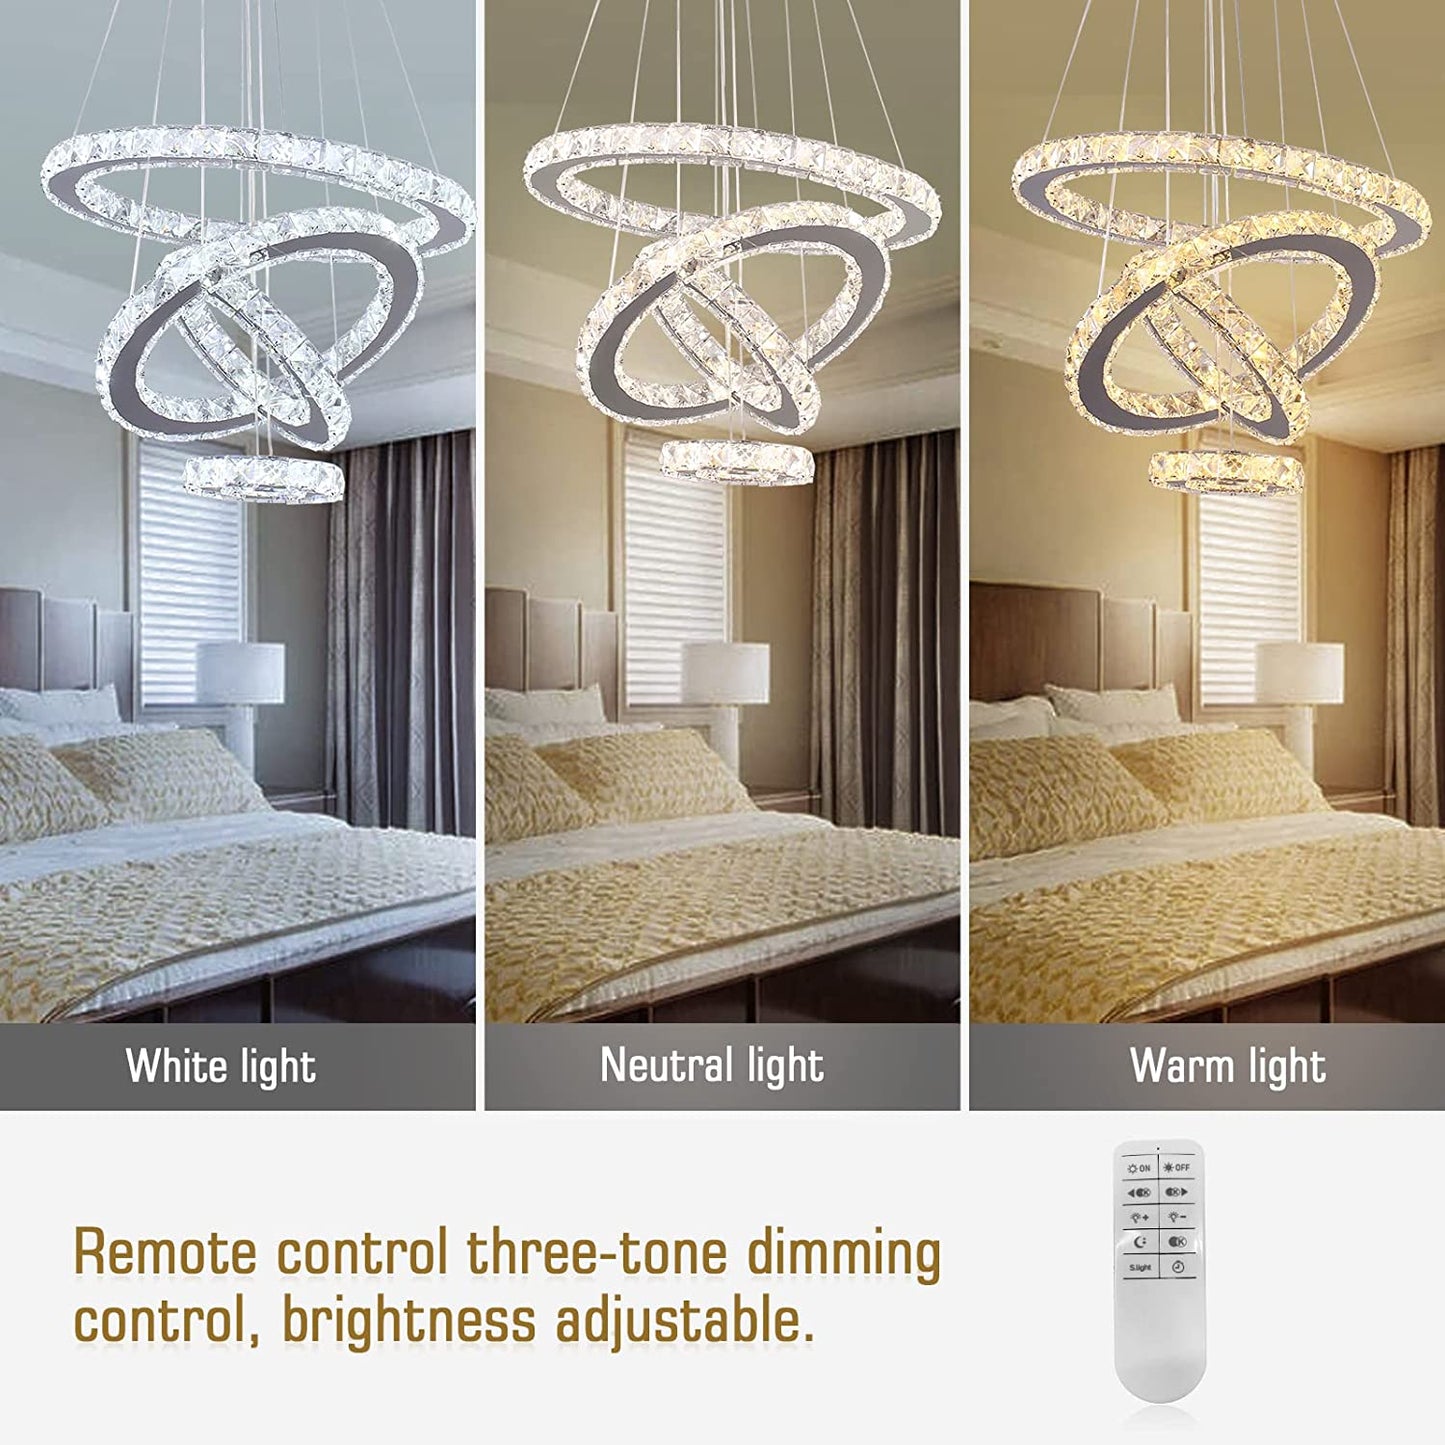 Crystal Chandeliers Modern LED Rings Pendant Light Adjustable Stainless Steel Ceiling Light Fixture for Living Room Dining Room Bedroom (Dimmable)